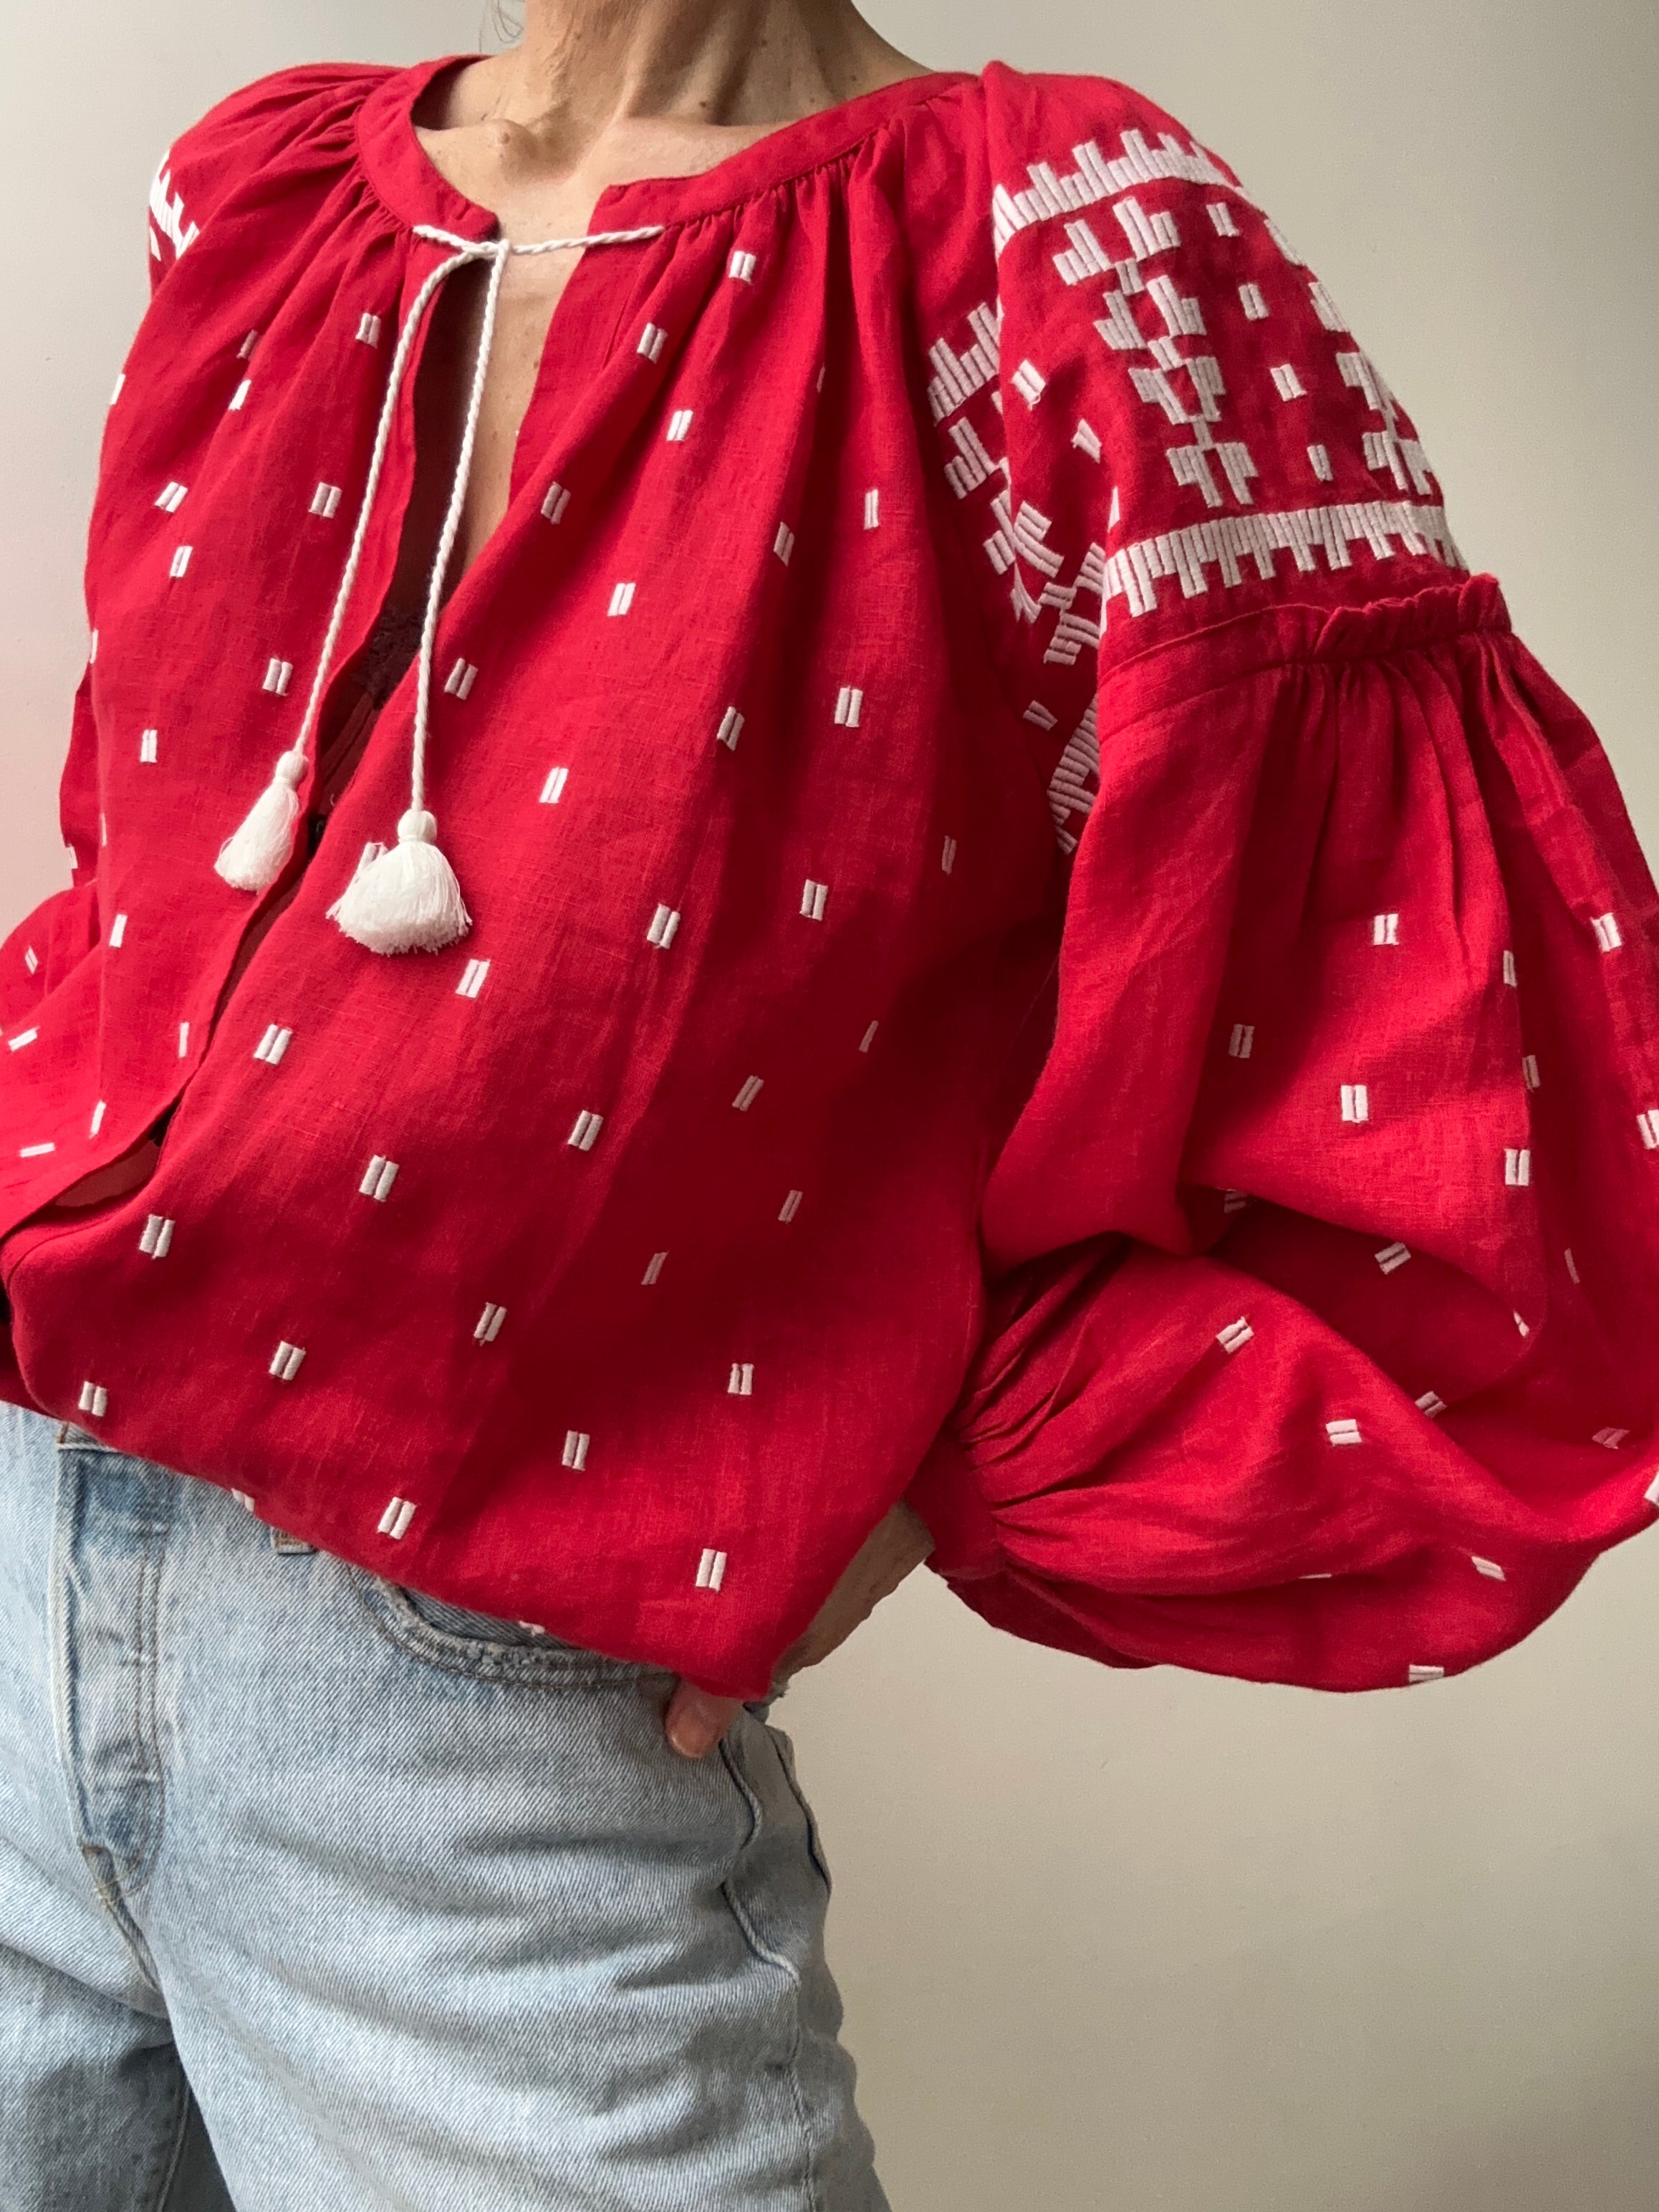 March 11 Blouses March 11 Geometric Blouse Red